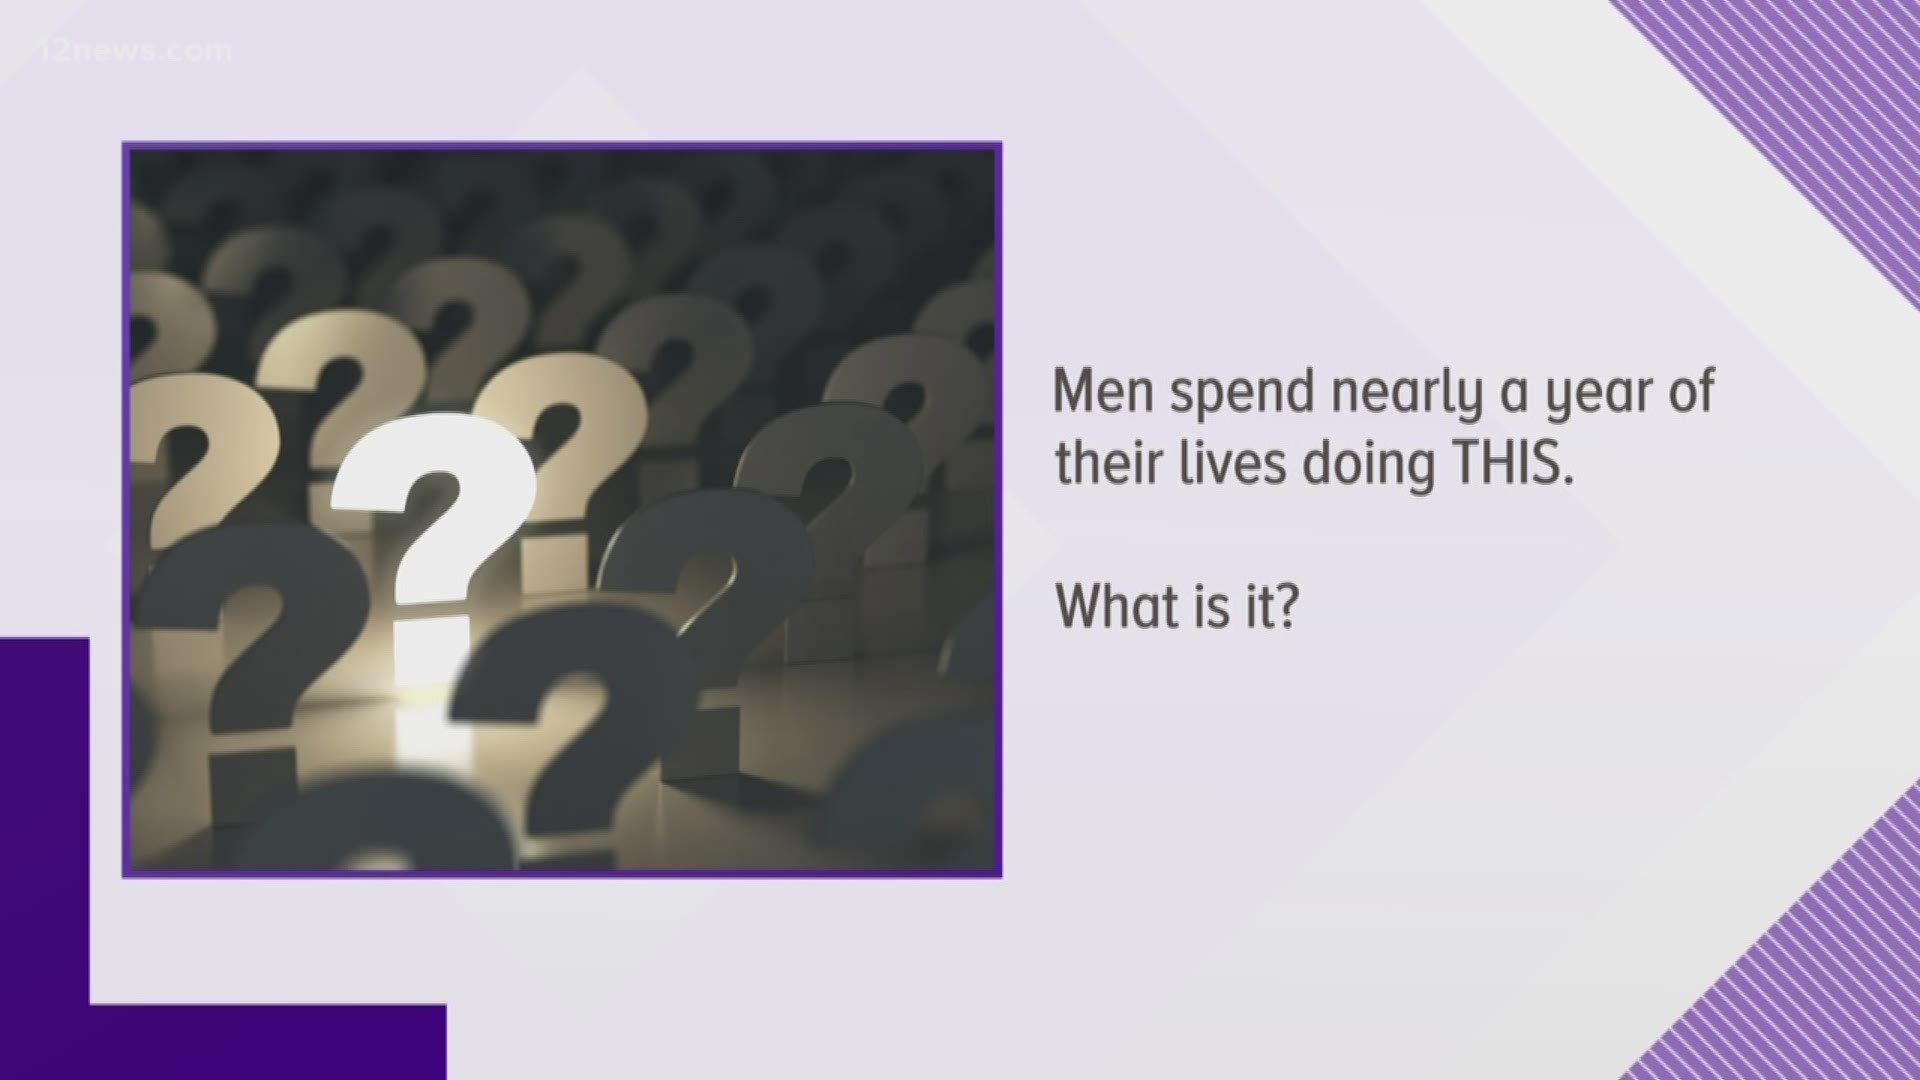 What do men spend a year of their lives doing?